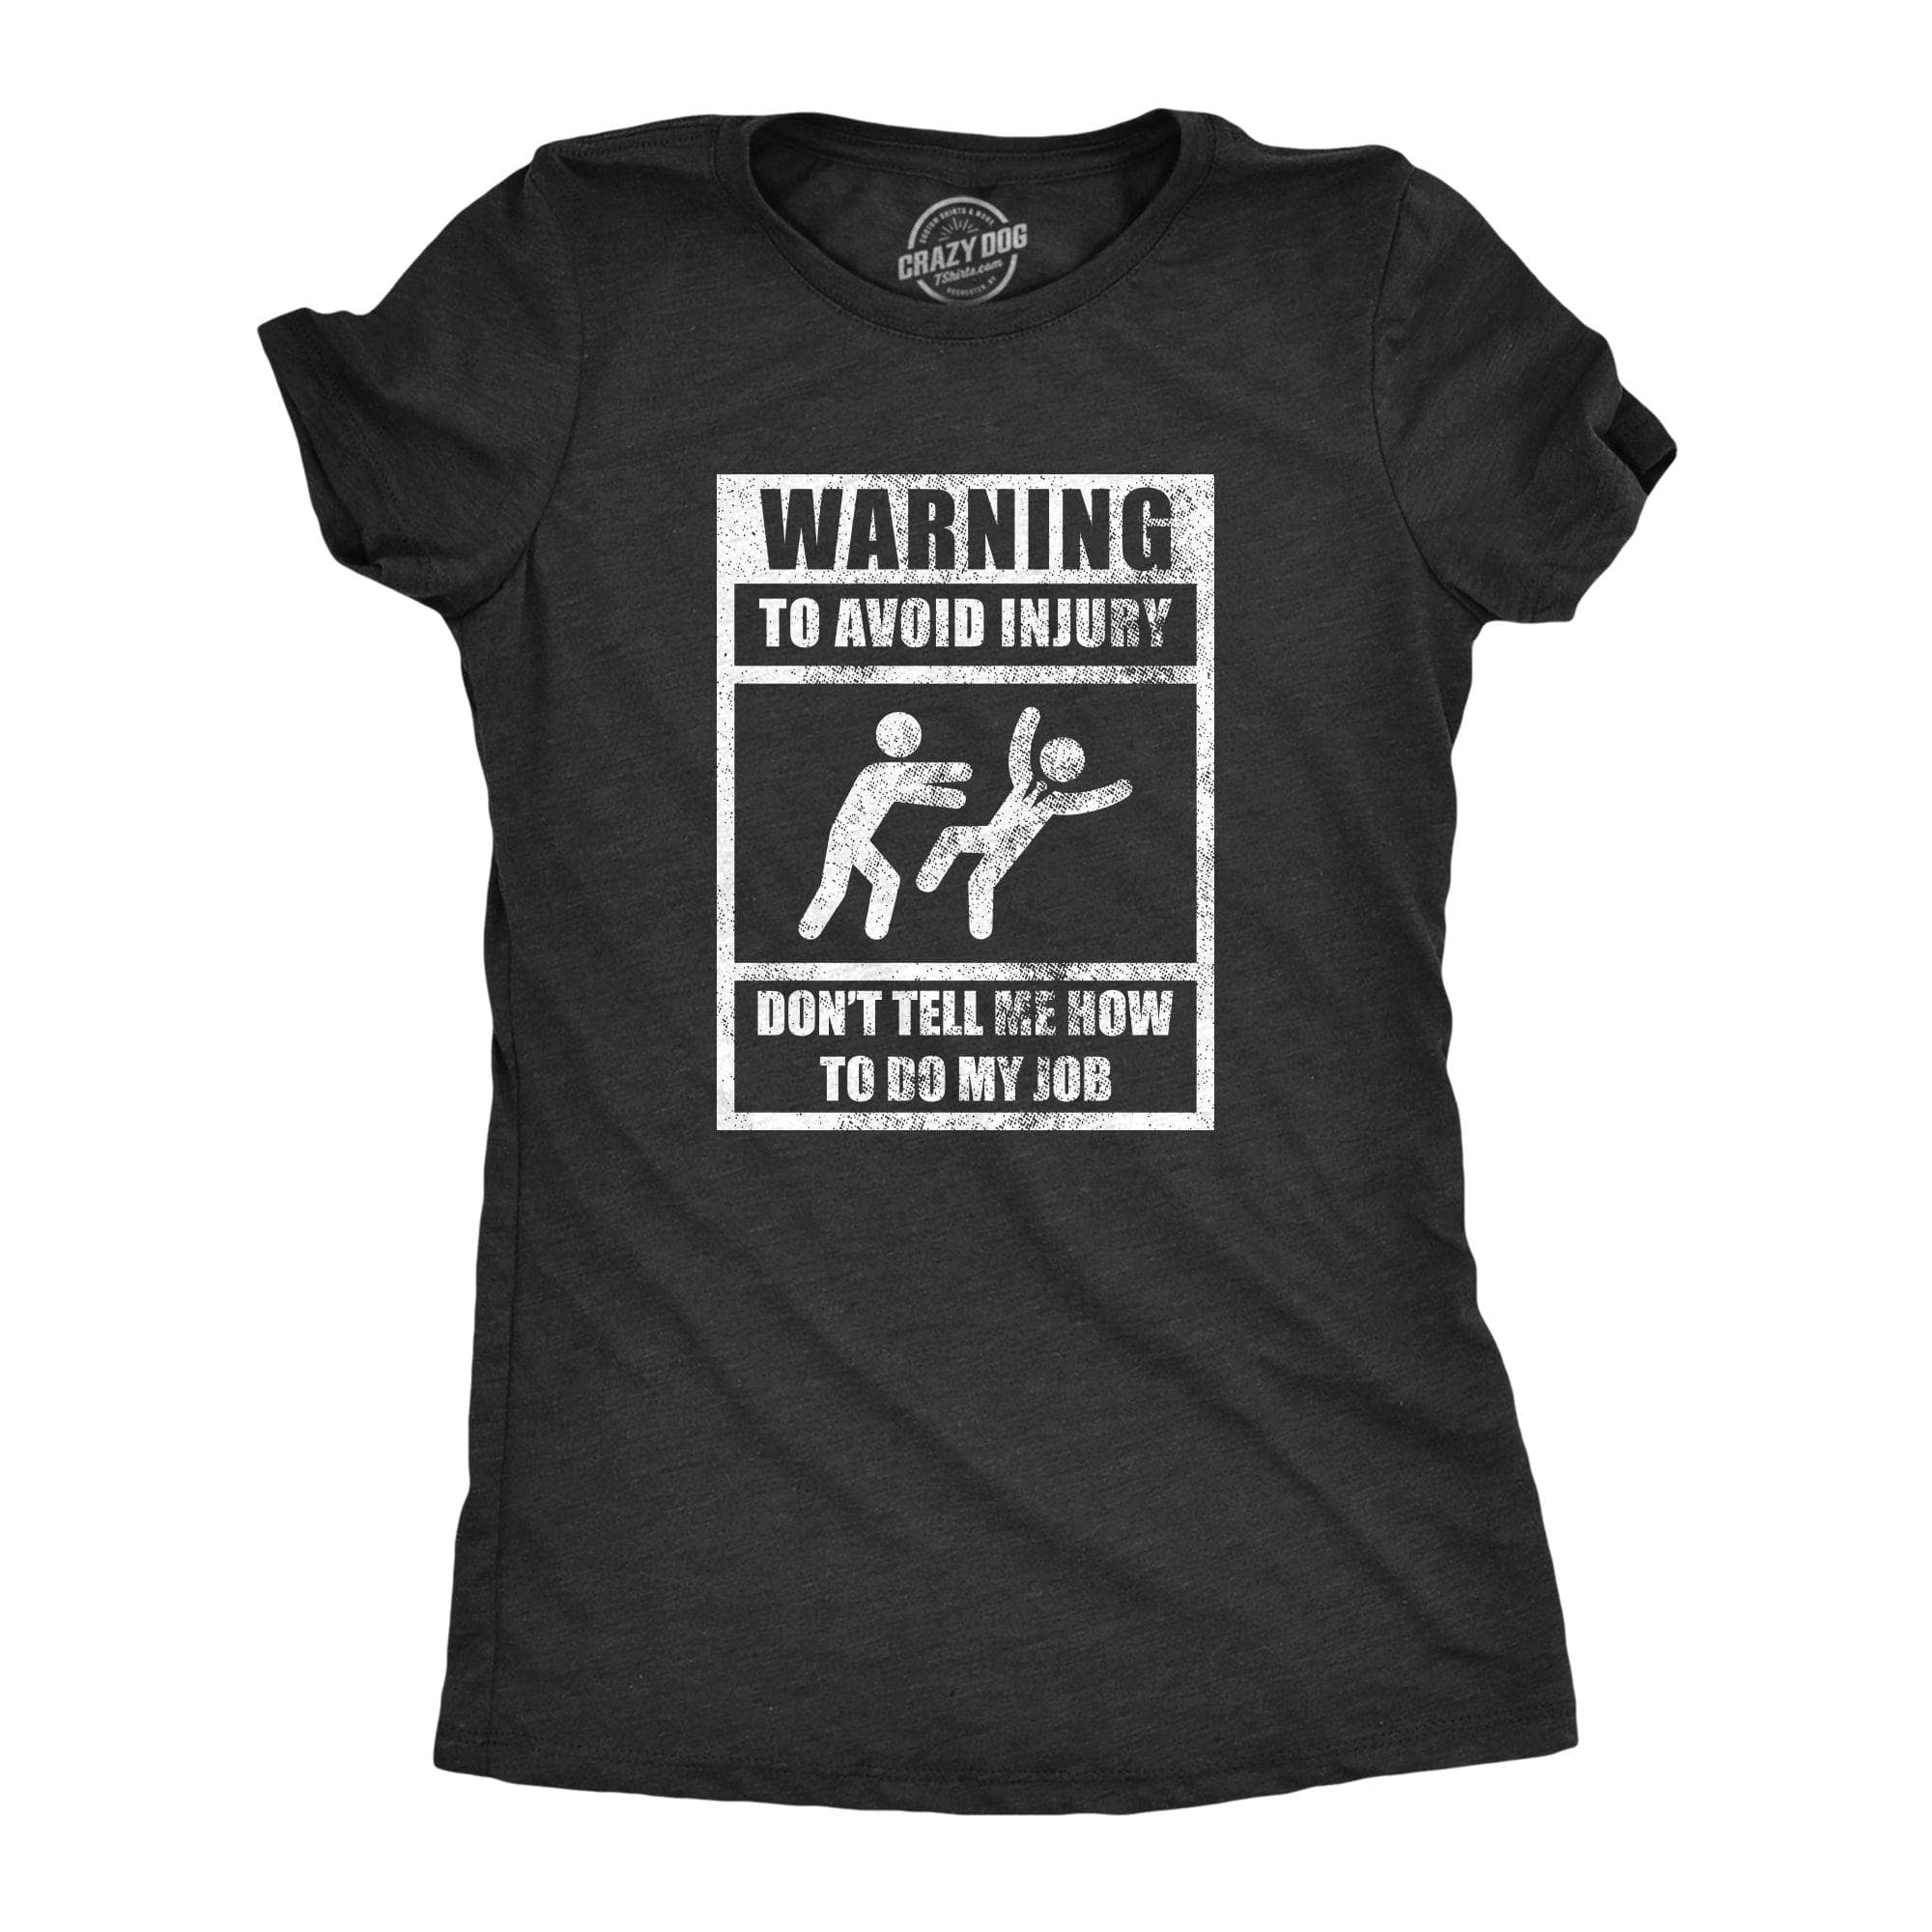 Warning To Avoid Injury Don’t Tell Me How To Do My Job Women's Tshirt  -  Crazy Dog T-Shirts